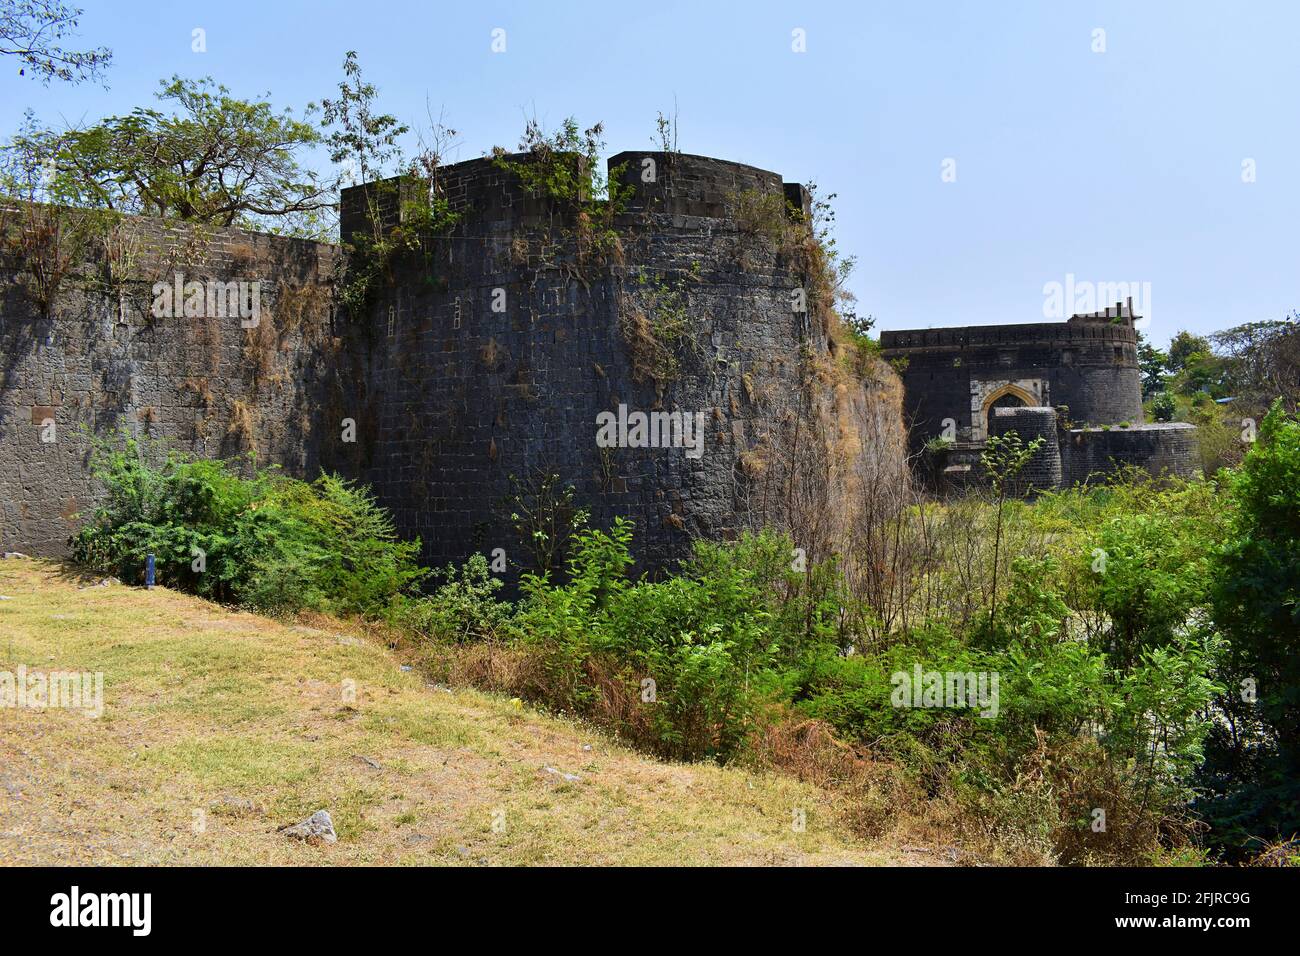 Bastions of the Ahmednagar fort. Commenced in 1559 under the rule of Hussain Nizam Shah. And  completed  by 1562.  Maharashtra, India. Stock Photo